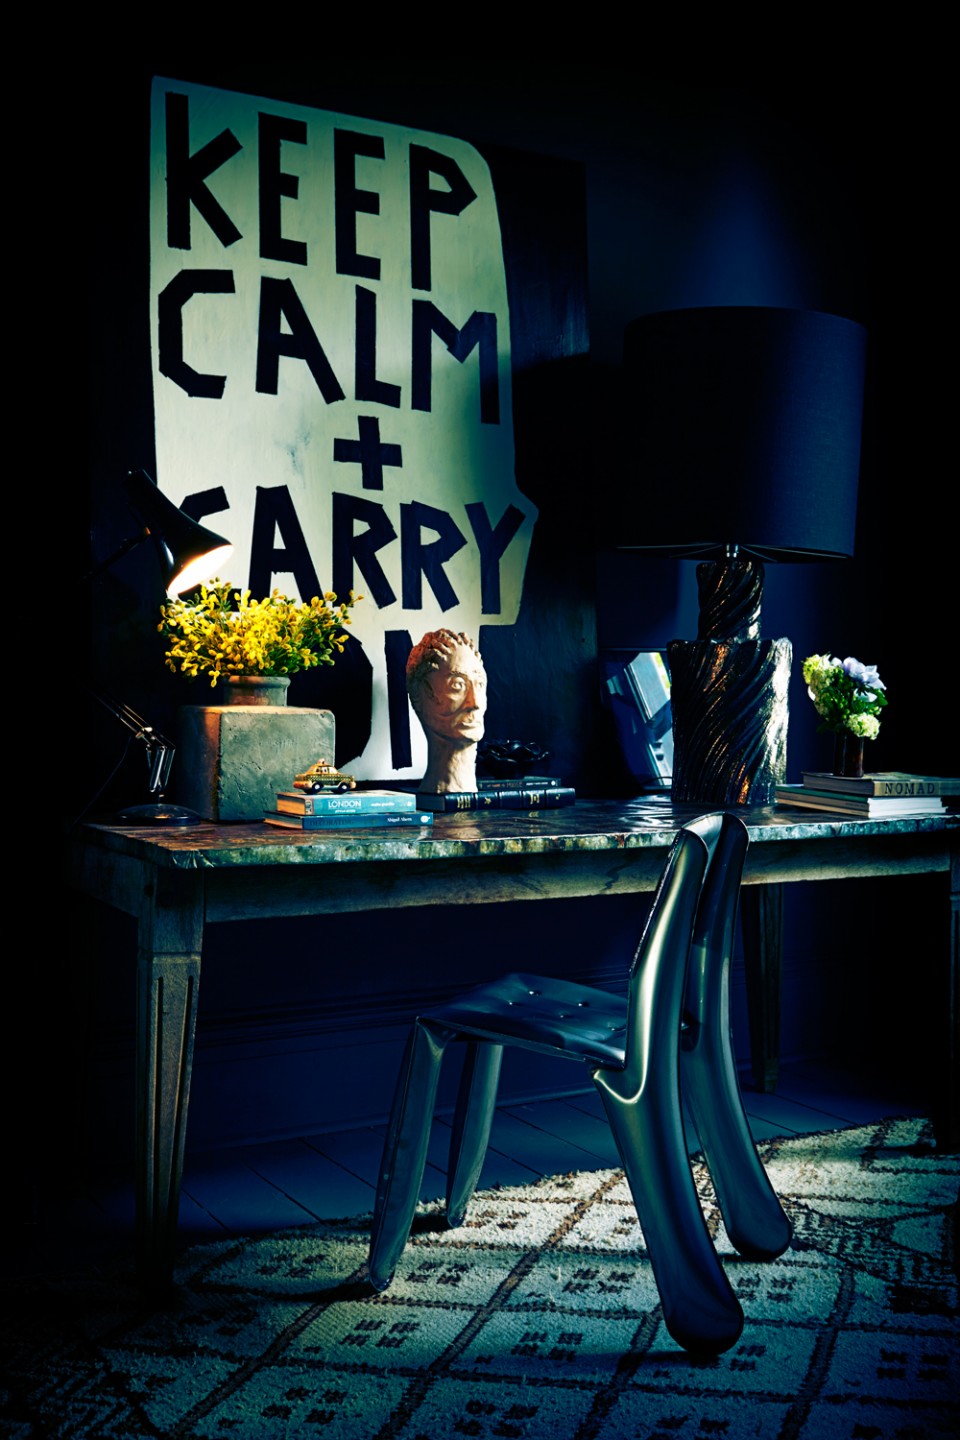 Barbara Smith's Keep Calm + Carry On in Abigail Ahern's studio